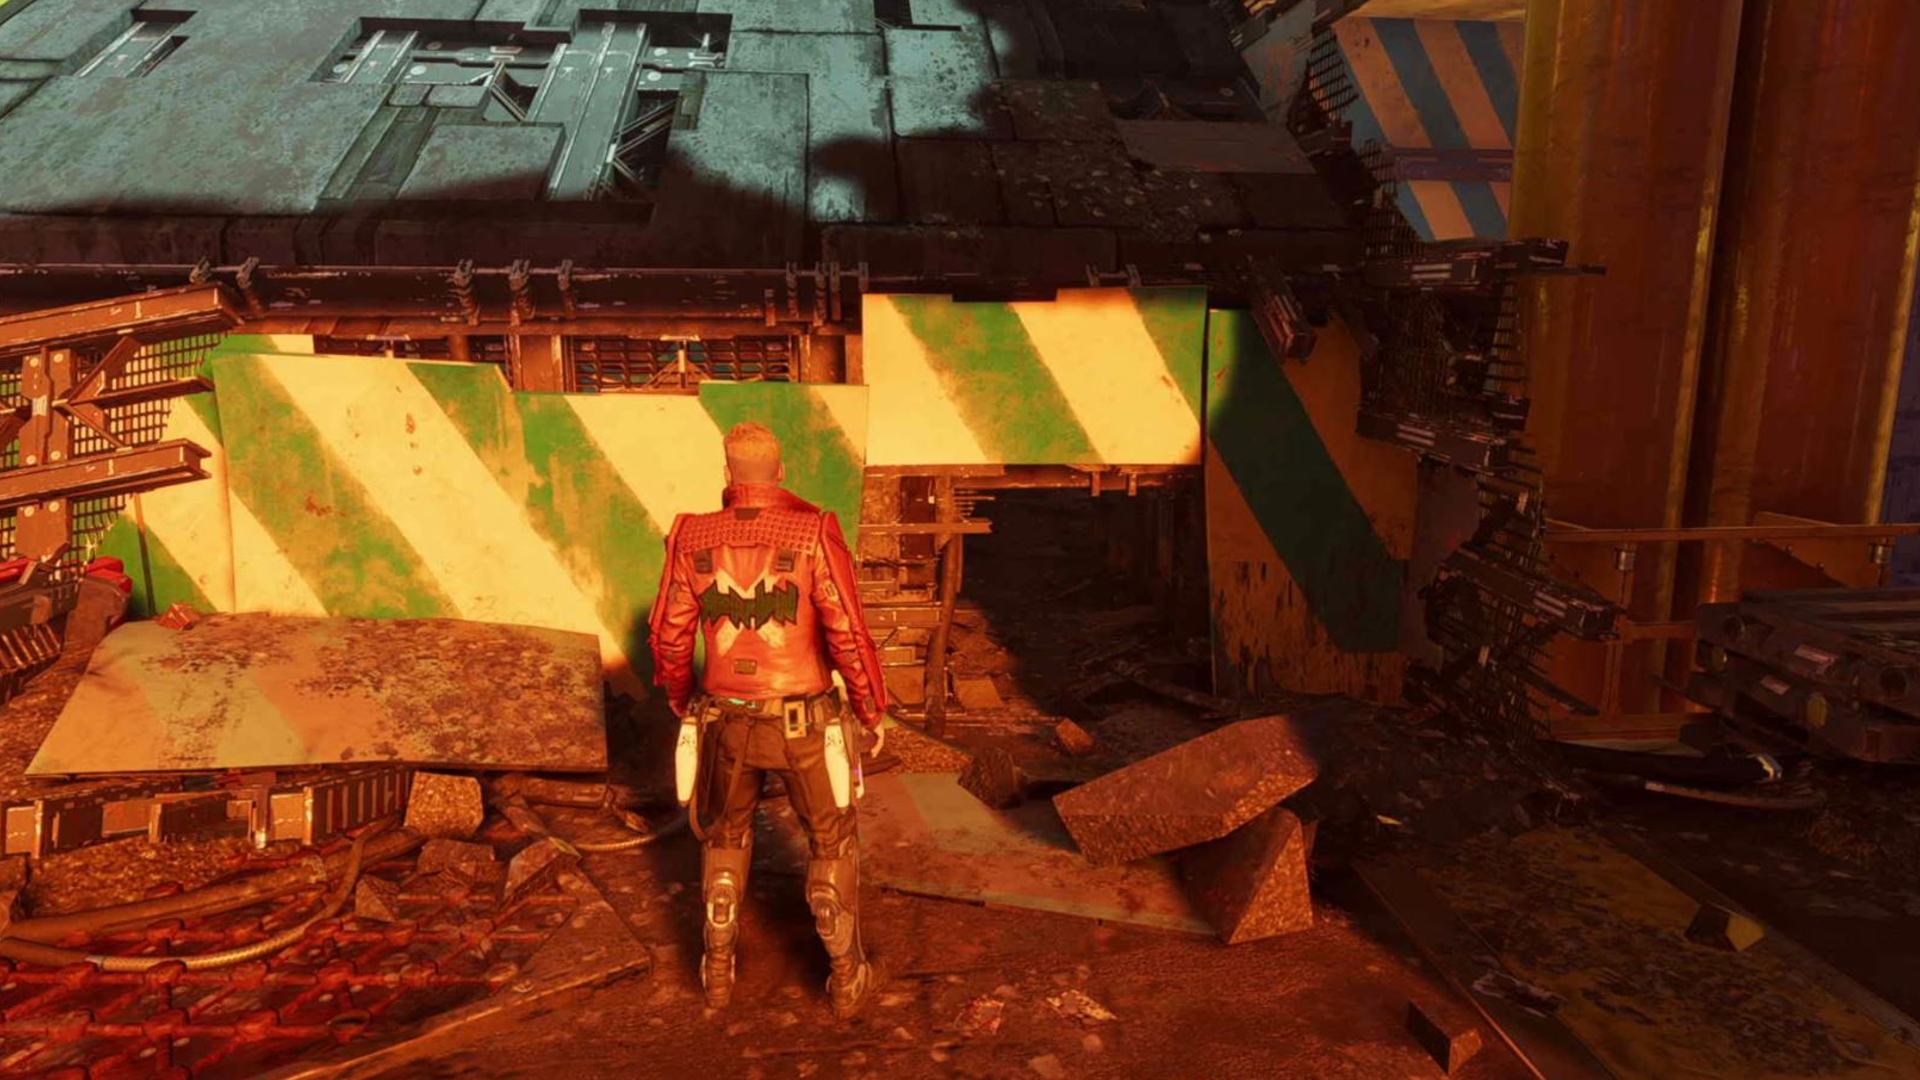 Guardians of the Galaxy outfit locations: Star-Lord is looking at the opening beneath the ramp.